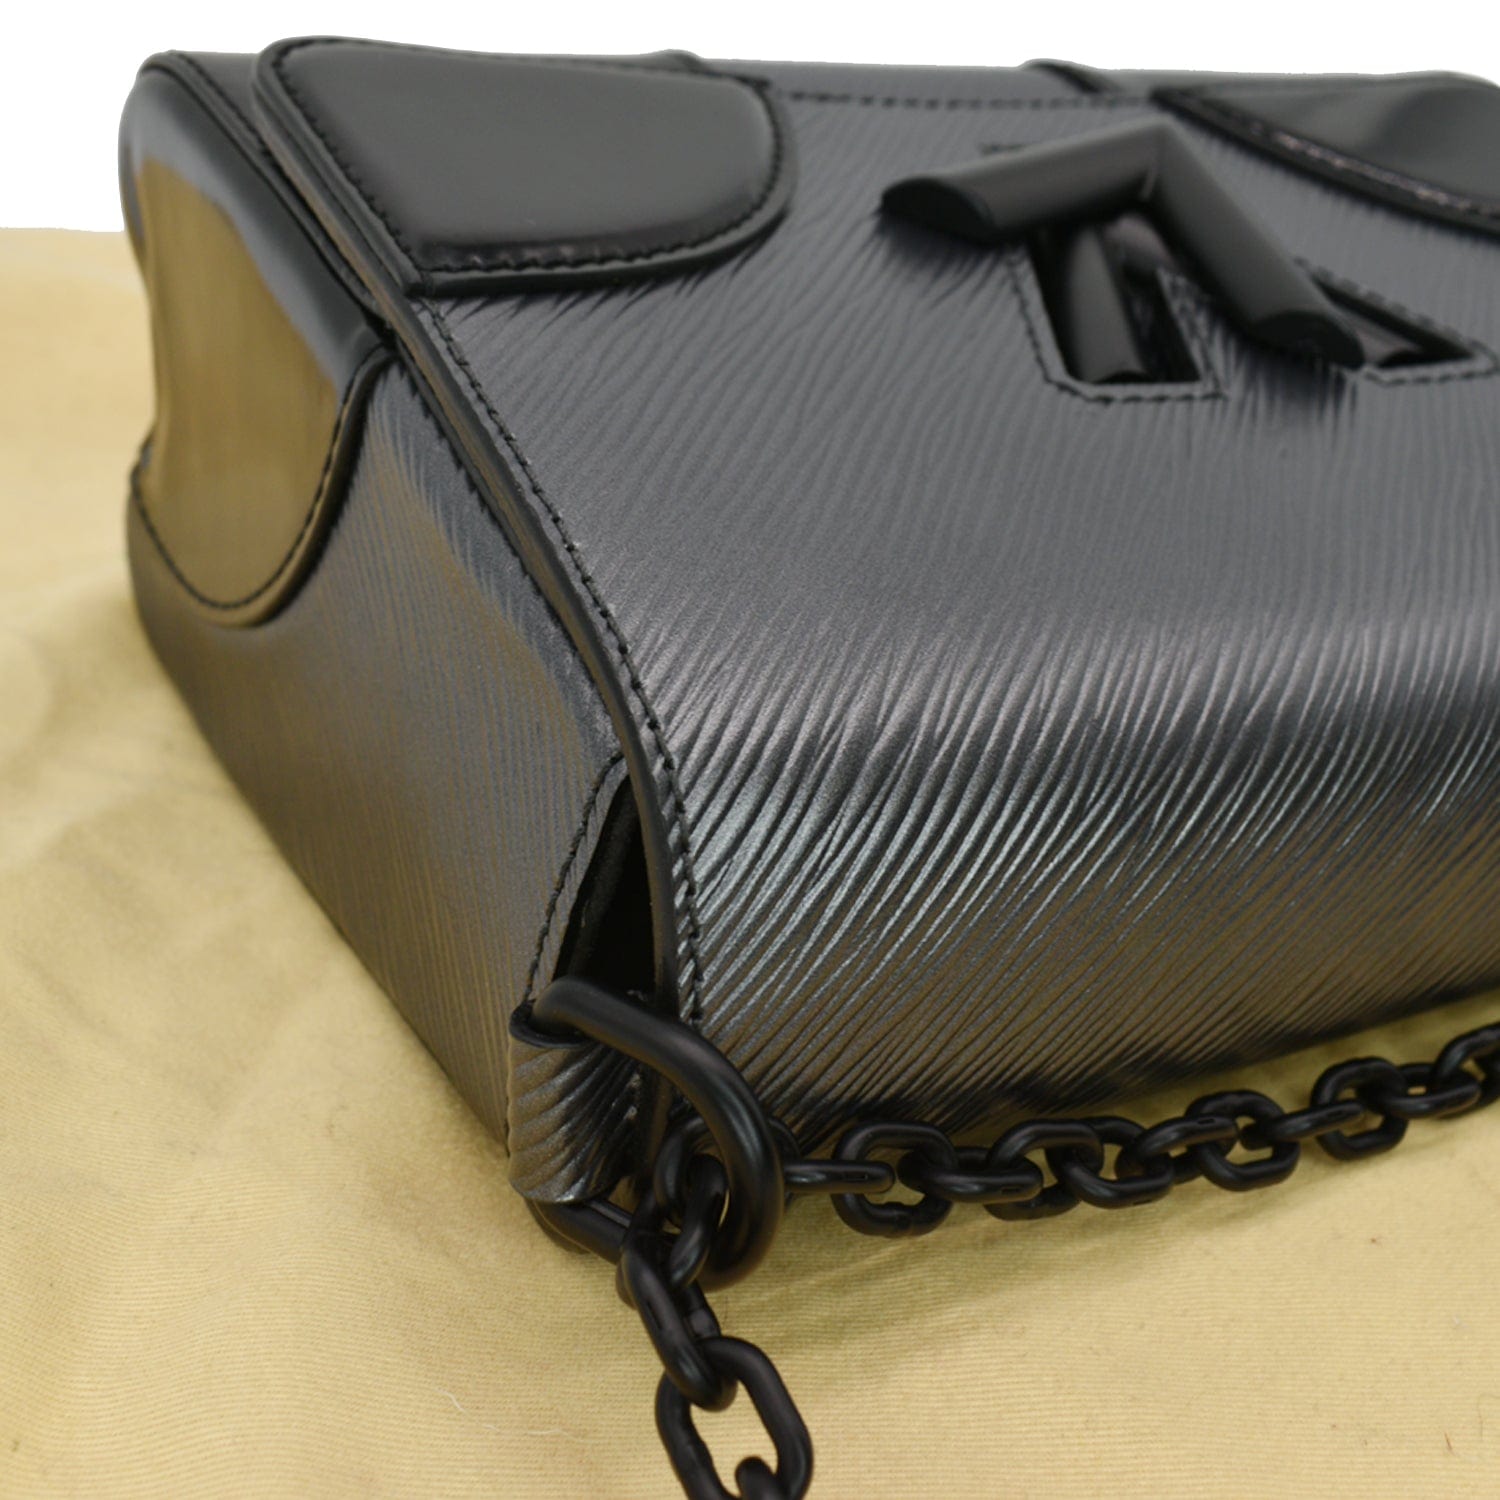 Louis Vuitton twist MM shoulder bag excellent condition durable epi black  leather with silver hardware asking $2800 comment for more information or  to purch…